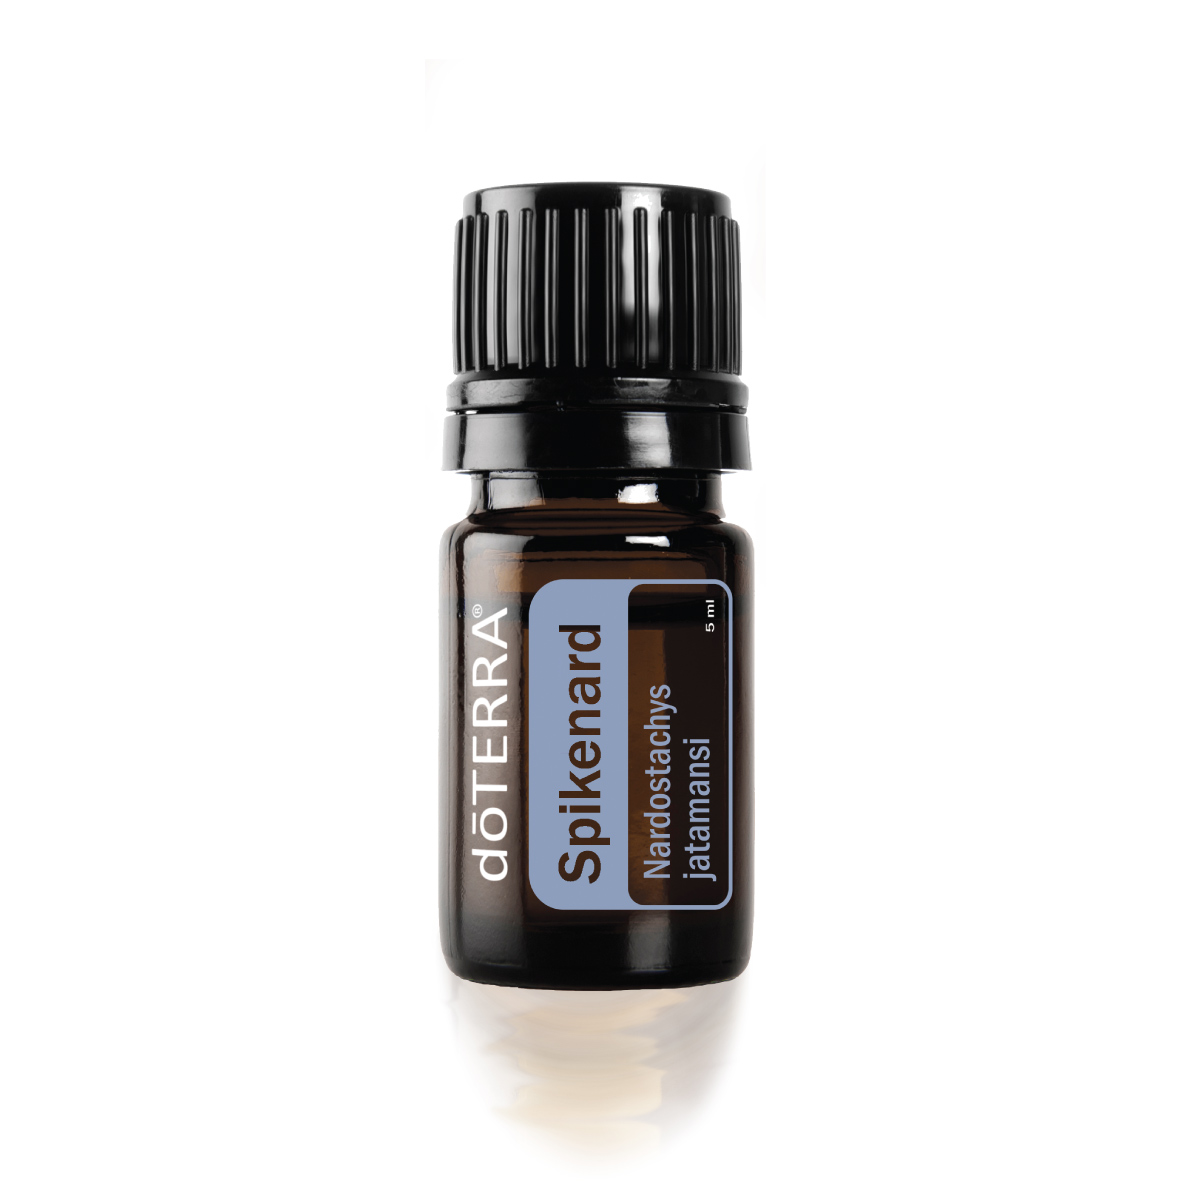 Bottle of doTERRA Spikenard essential oil. What is Spikenard oil used for? Spikenard essential oil can be used to purify the skin and promote relaxation.